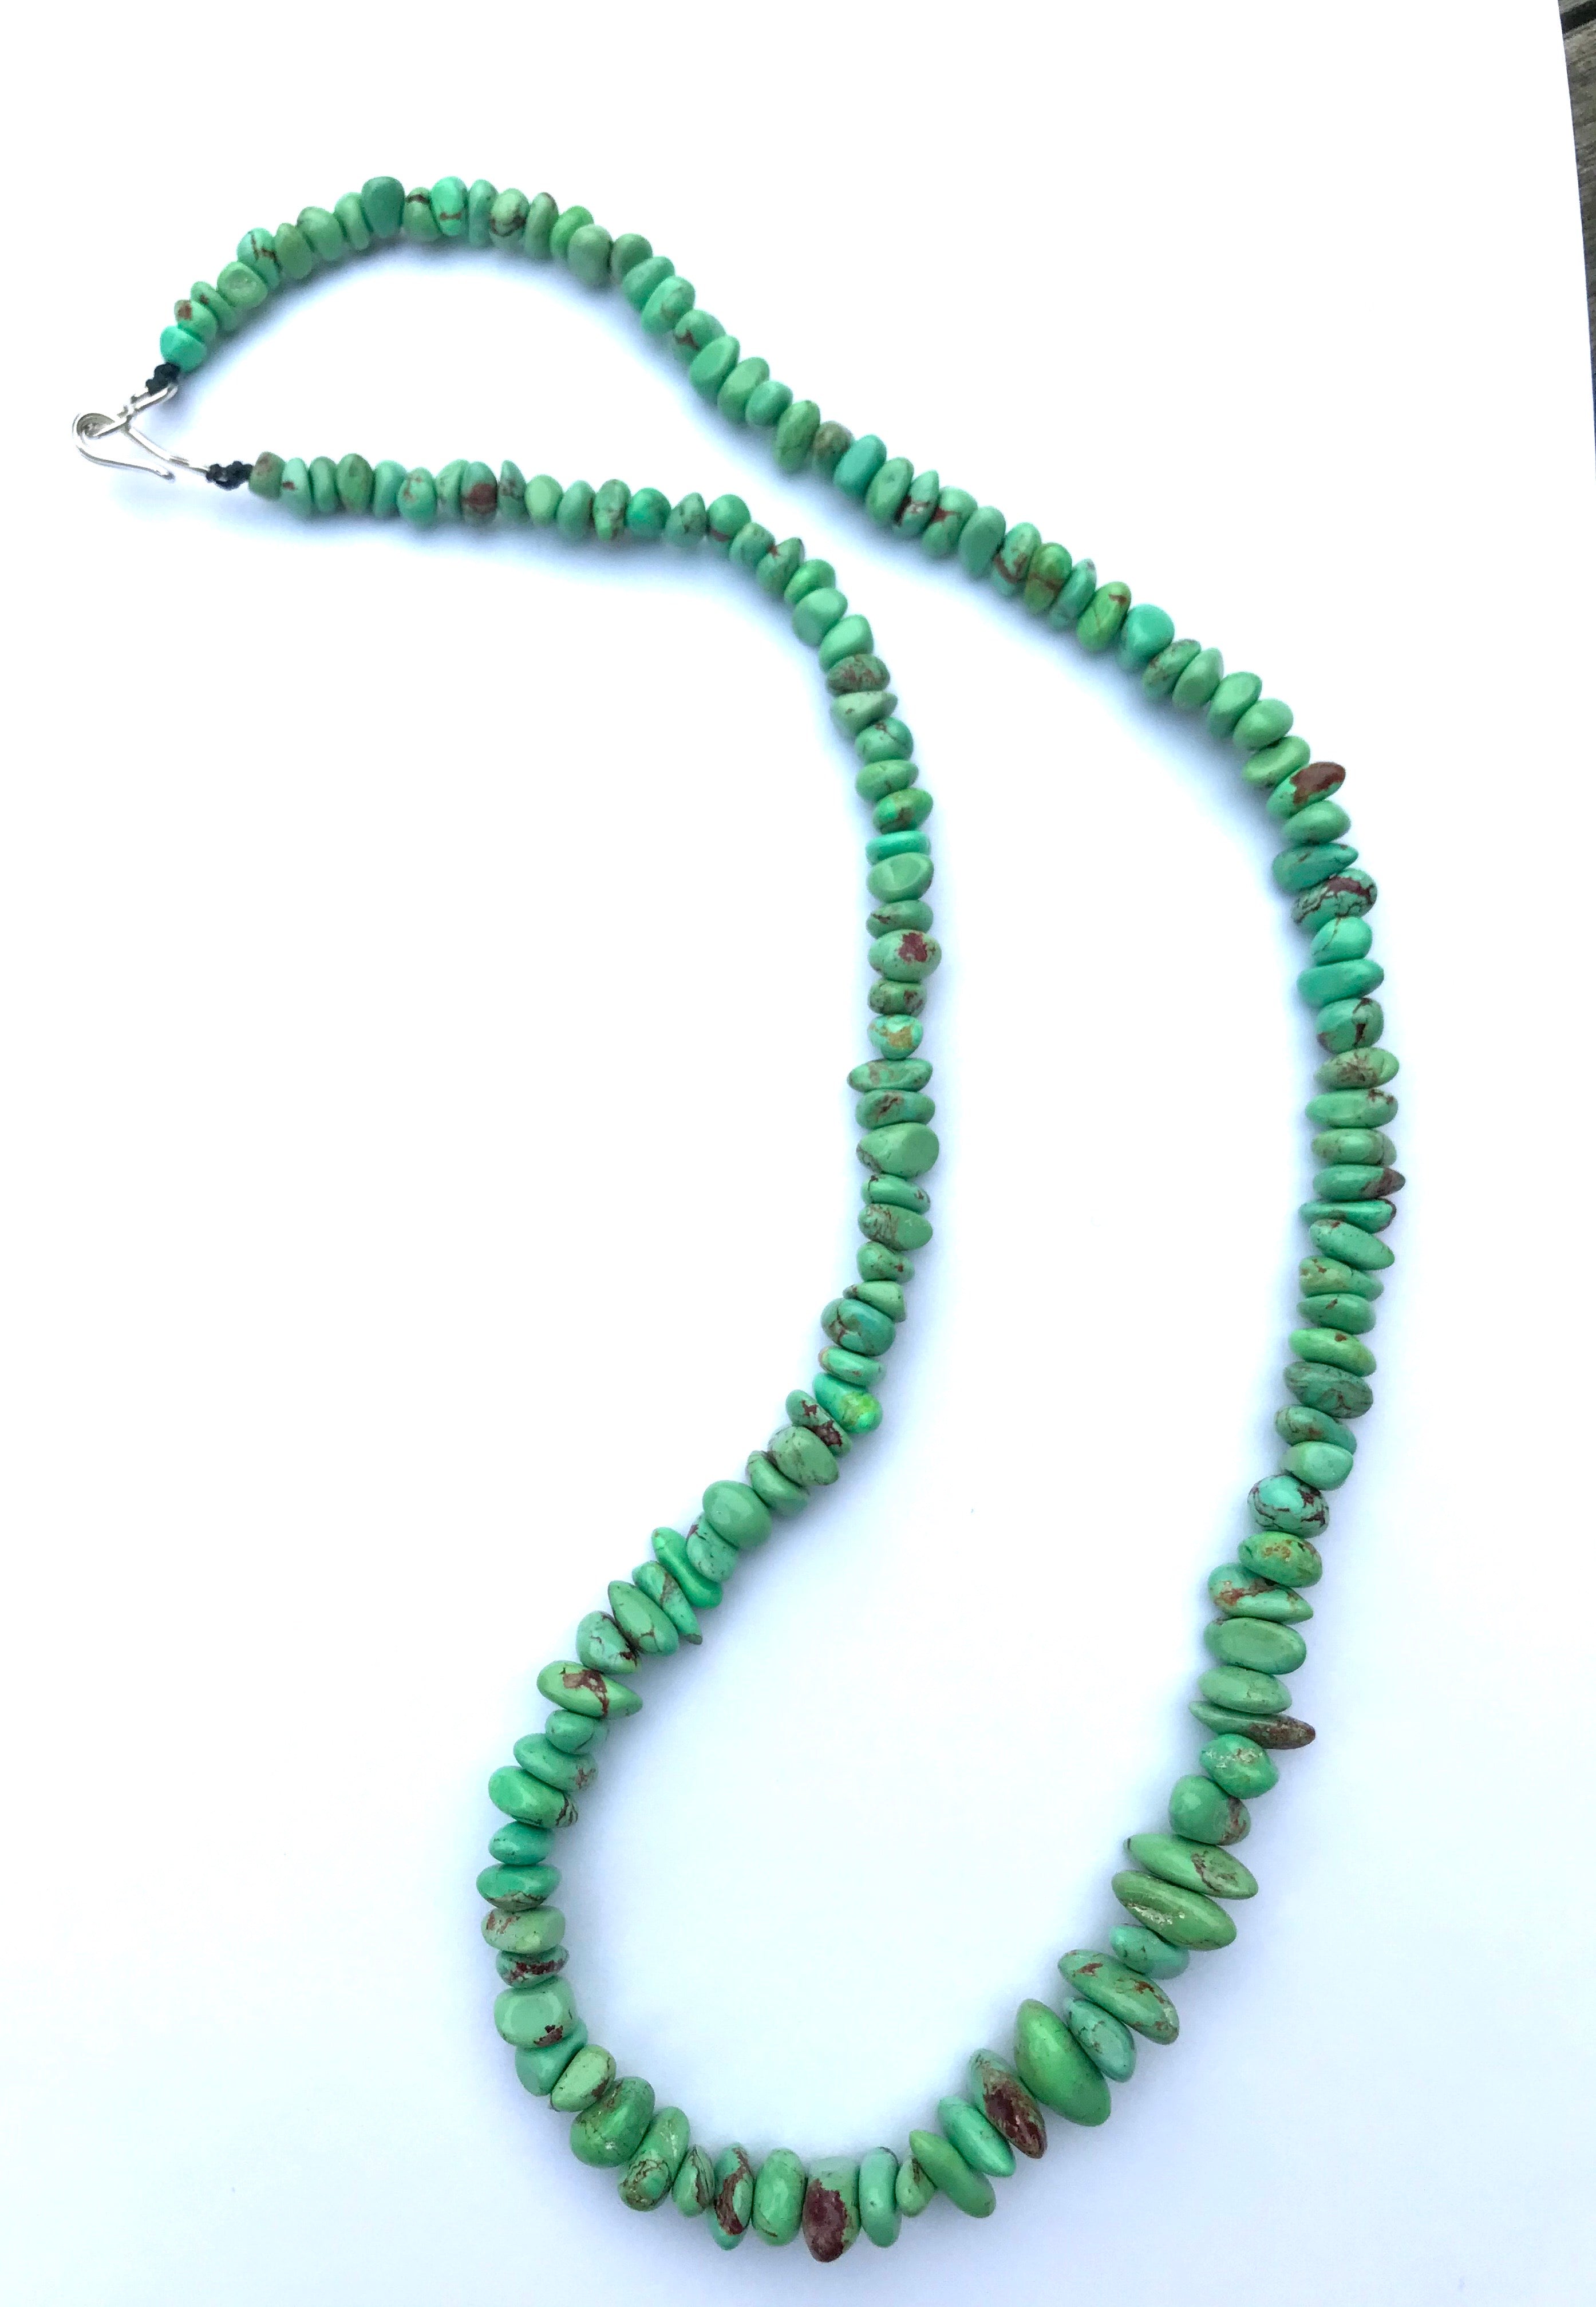 Stunning green turquoise turquoise necklace